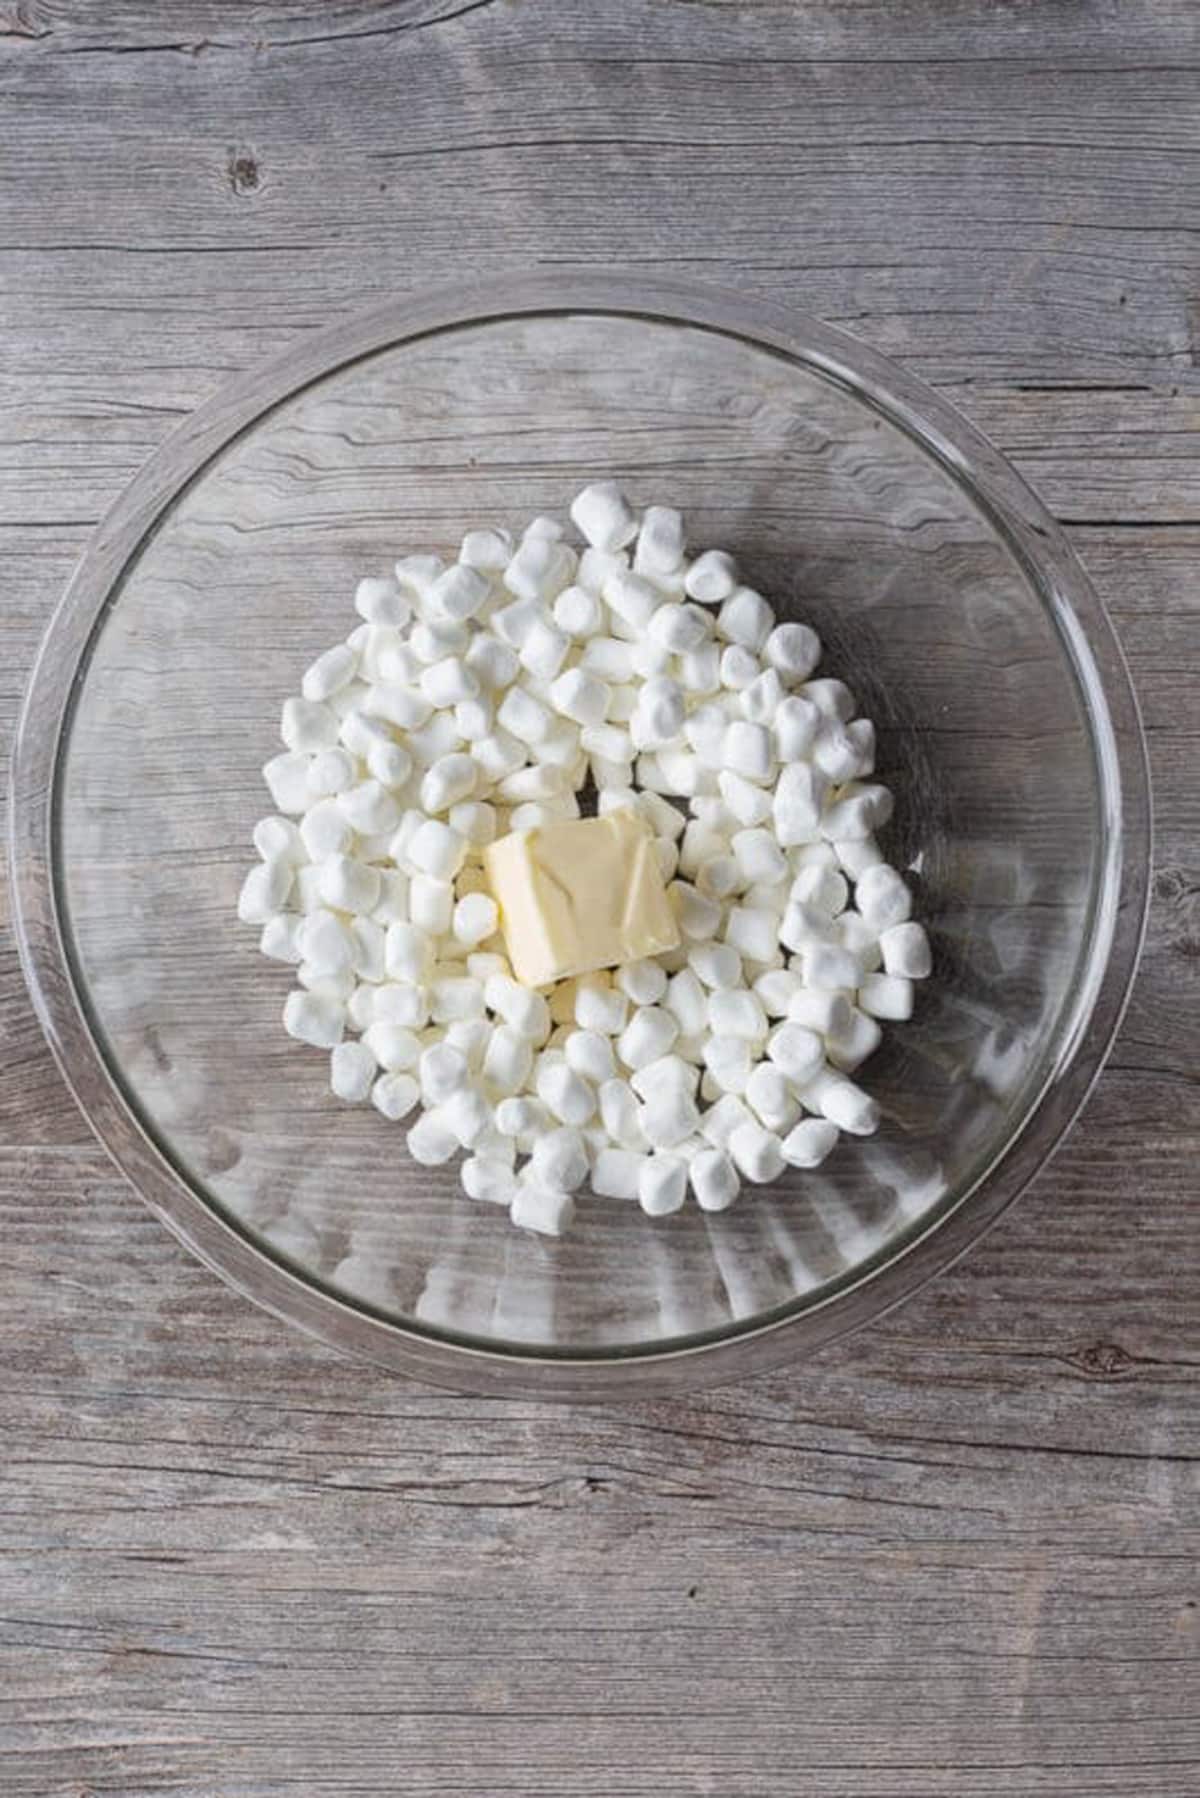 Mini marshmallows and a pat of butter in a large glass bowl.